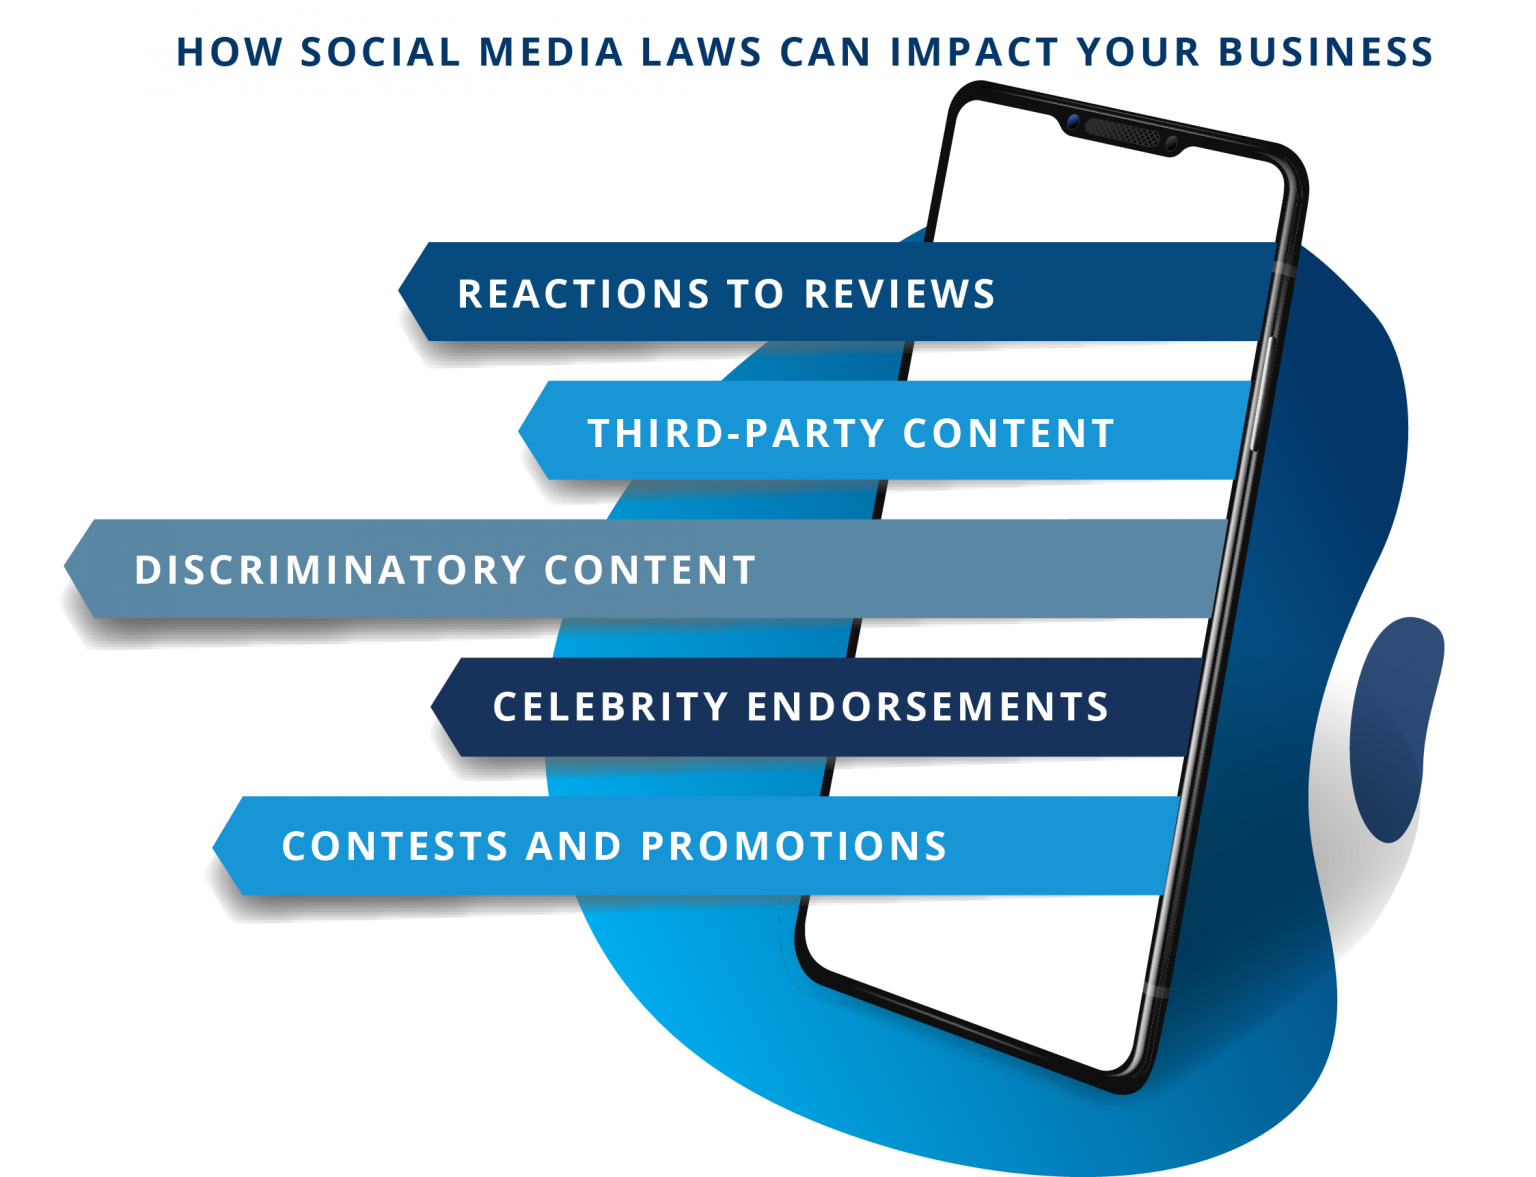 Infographic: How social media laws can impact your business: Reactions to reviews; third-party content; discriminatory content; celebrity endorsements; contests and promotions.